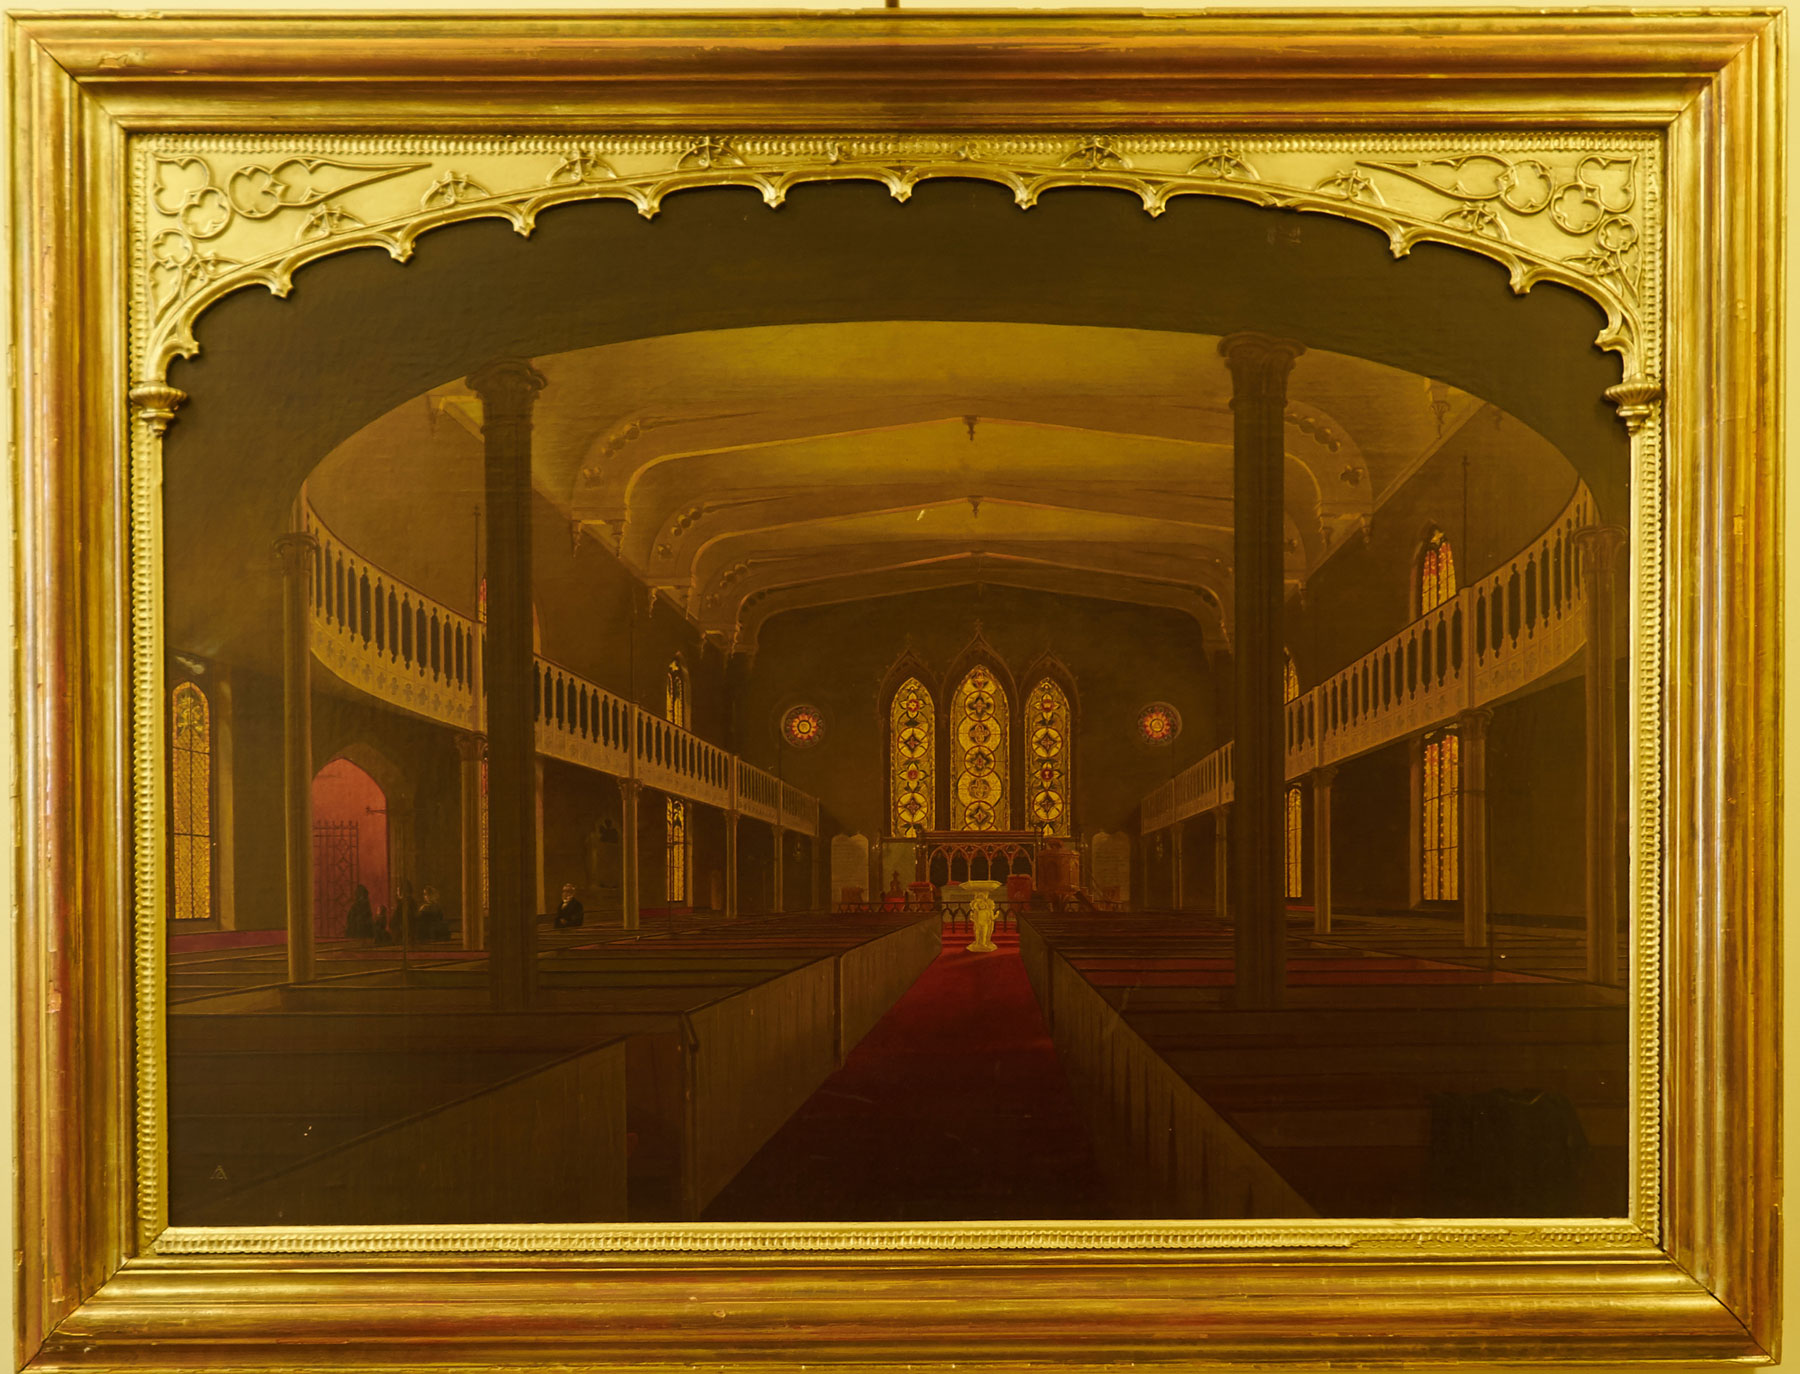 A. Zeno Shindler, Painting of the Church Interior